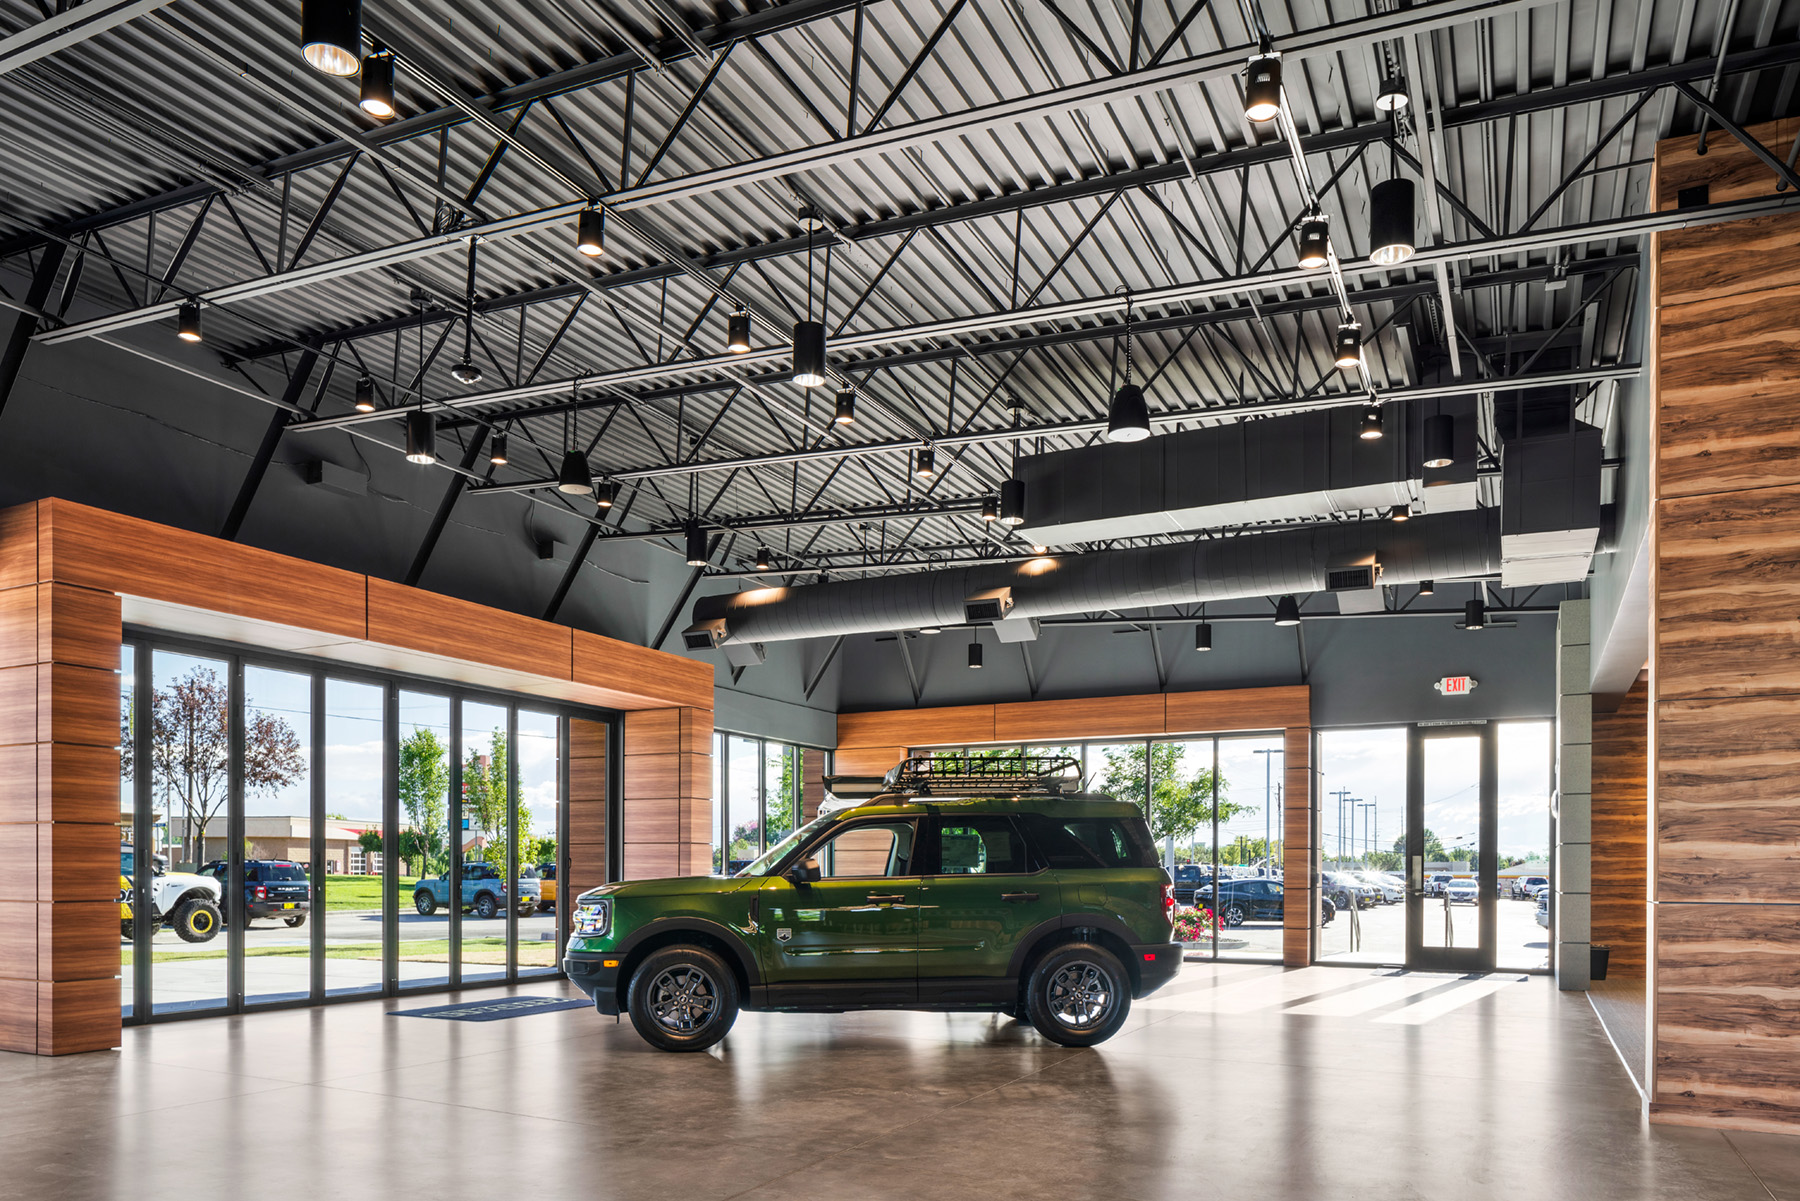 High bay cylinder lighting and a pendant track lighting system illuminate the Kendall Bronco showroom.
 